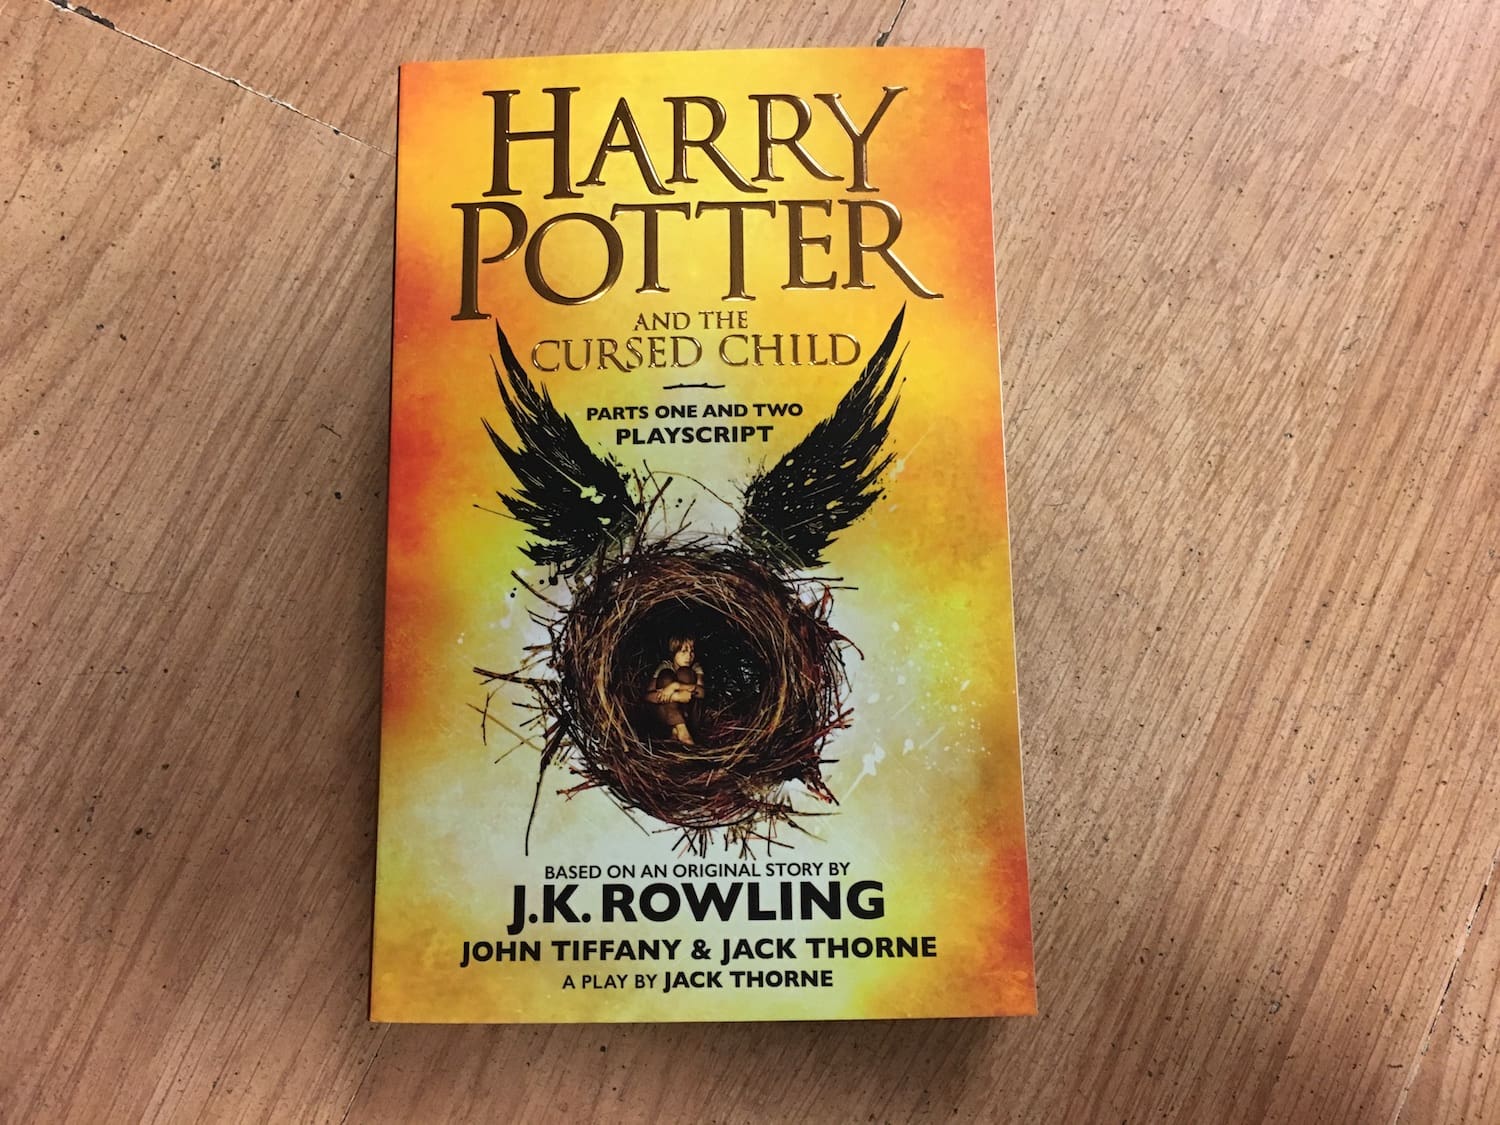 Featured image for “Enter our competition for a chance to win a copy of Harry Potter and the Cursed Child”